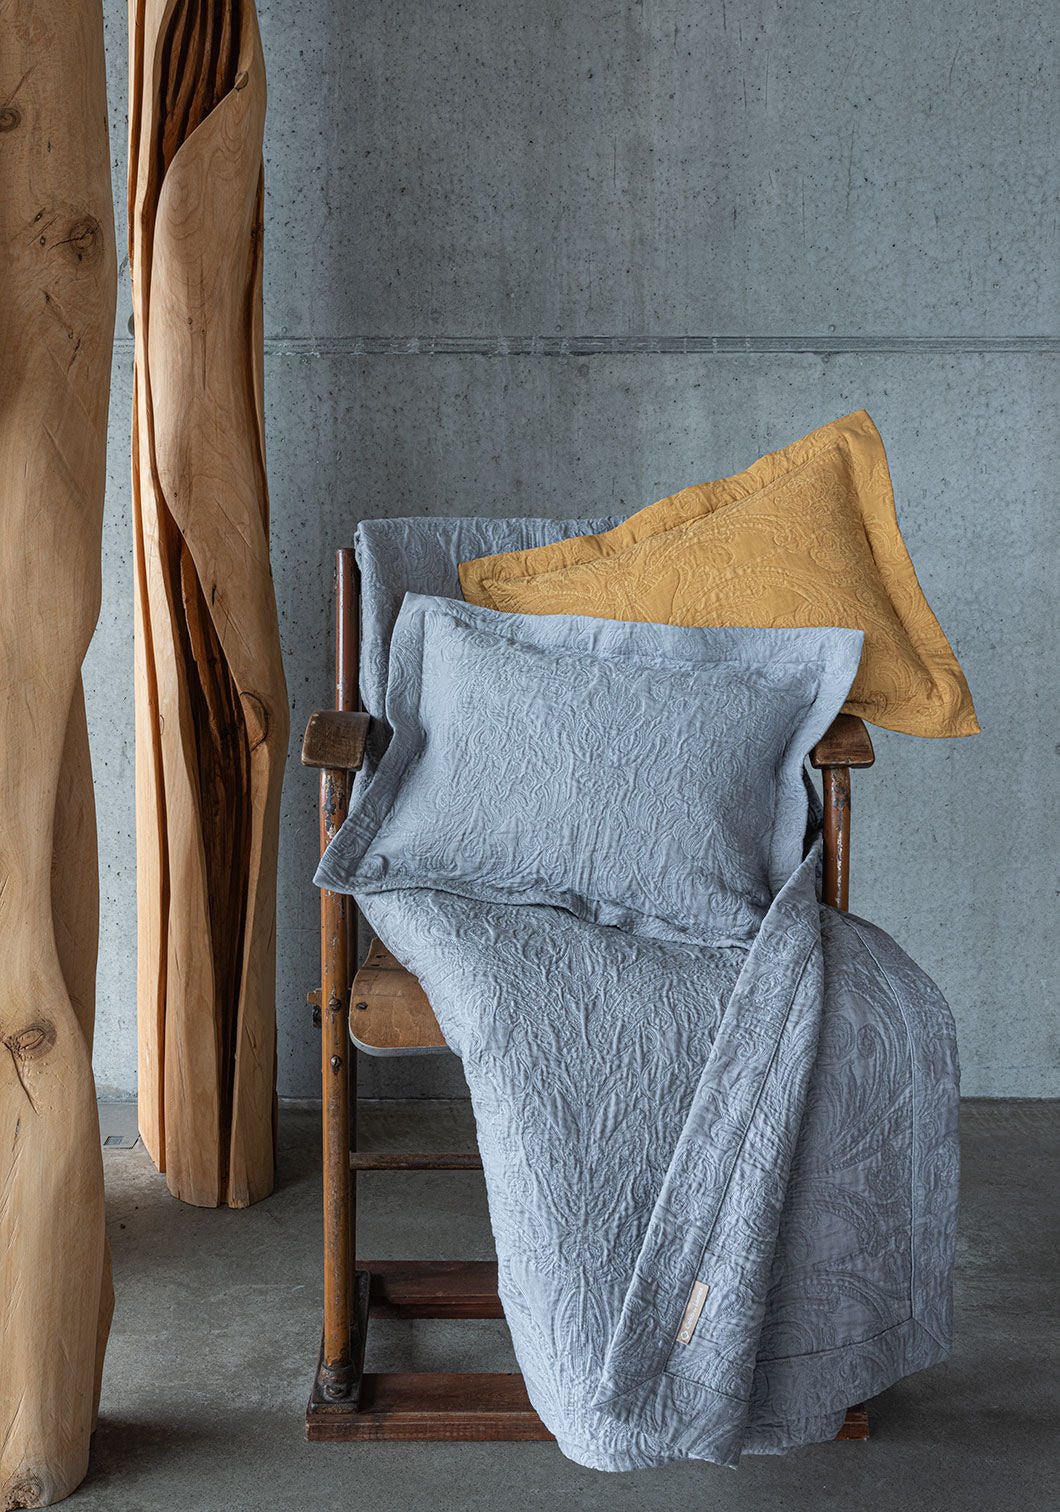 BRAGA Pillow and Bed Covers by Celso de Lemos - |VESIMI Design|